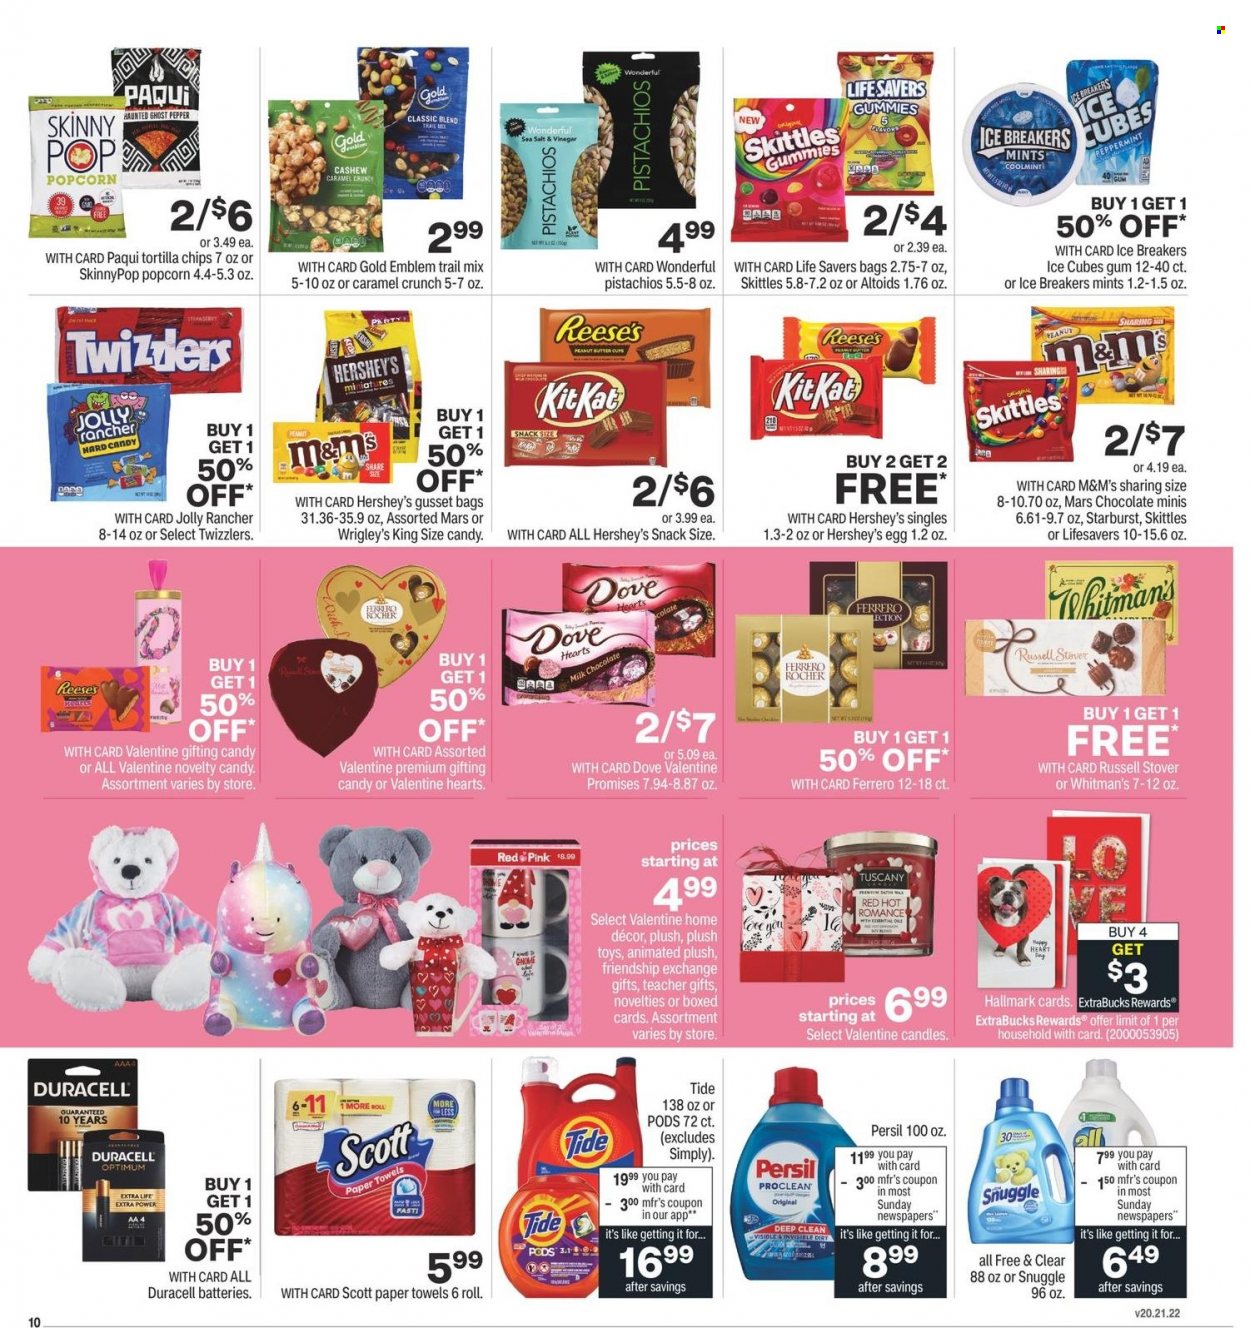 thumbnail - CVS Pharmacy Flyer - 01/23/2022 - 01/29/2022 - Sales products - Reese's, Hershey's, milk chocolate, chocolate, snack, ice cubes gum, Ferrero Rocher, Mars, M&M's, Skittles, peanut butter cups, Starburst, tortilla chips, chips, popcorn, Skinny Pop, pistachios, trail mix, Dove, Scott, kitchen towels, paper towels, Snuggle, Tide, Persil, boxed card, candle, battery, Duracell, Optimum, toys. Page 11.